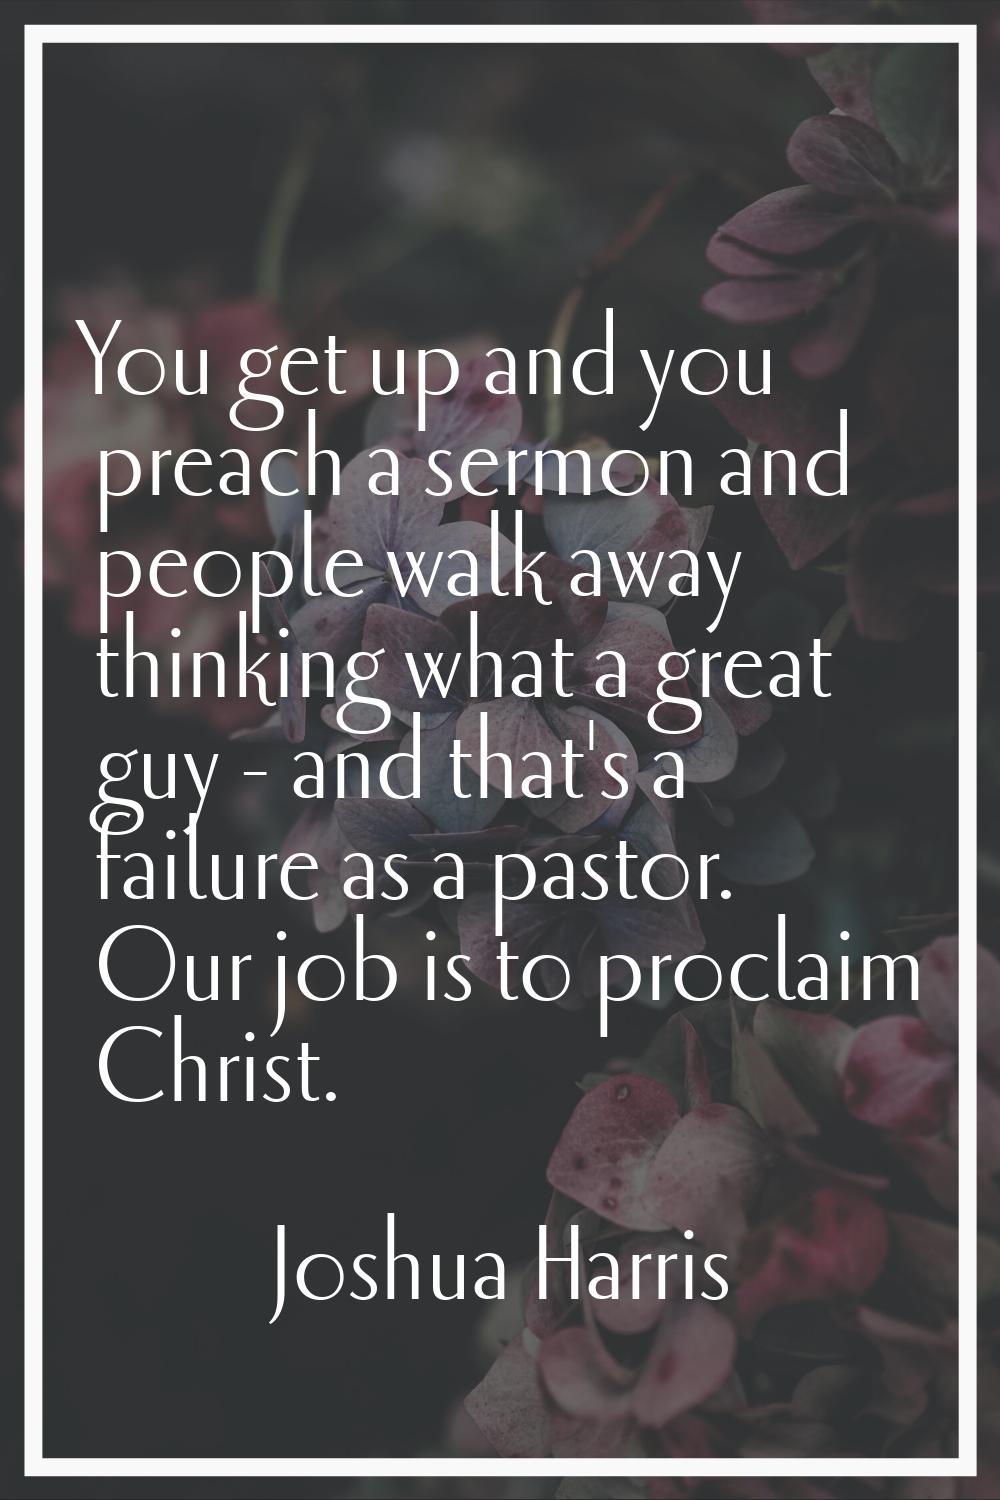 You get up and you preach a sermon and people walk away thinking what a great guy - and that's a fa